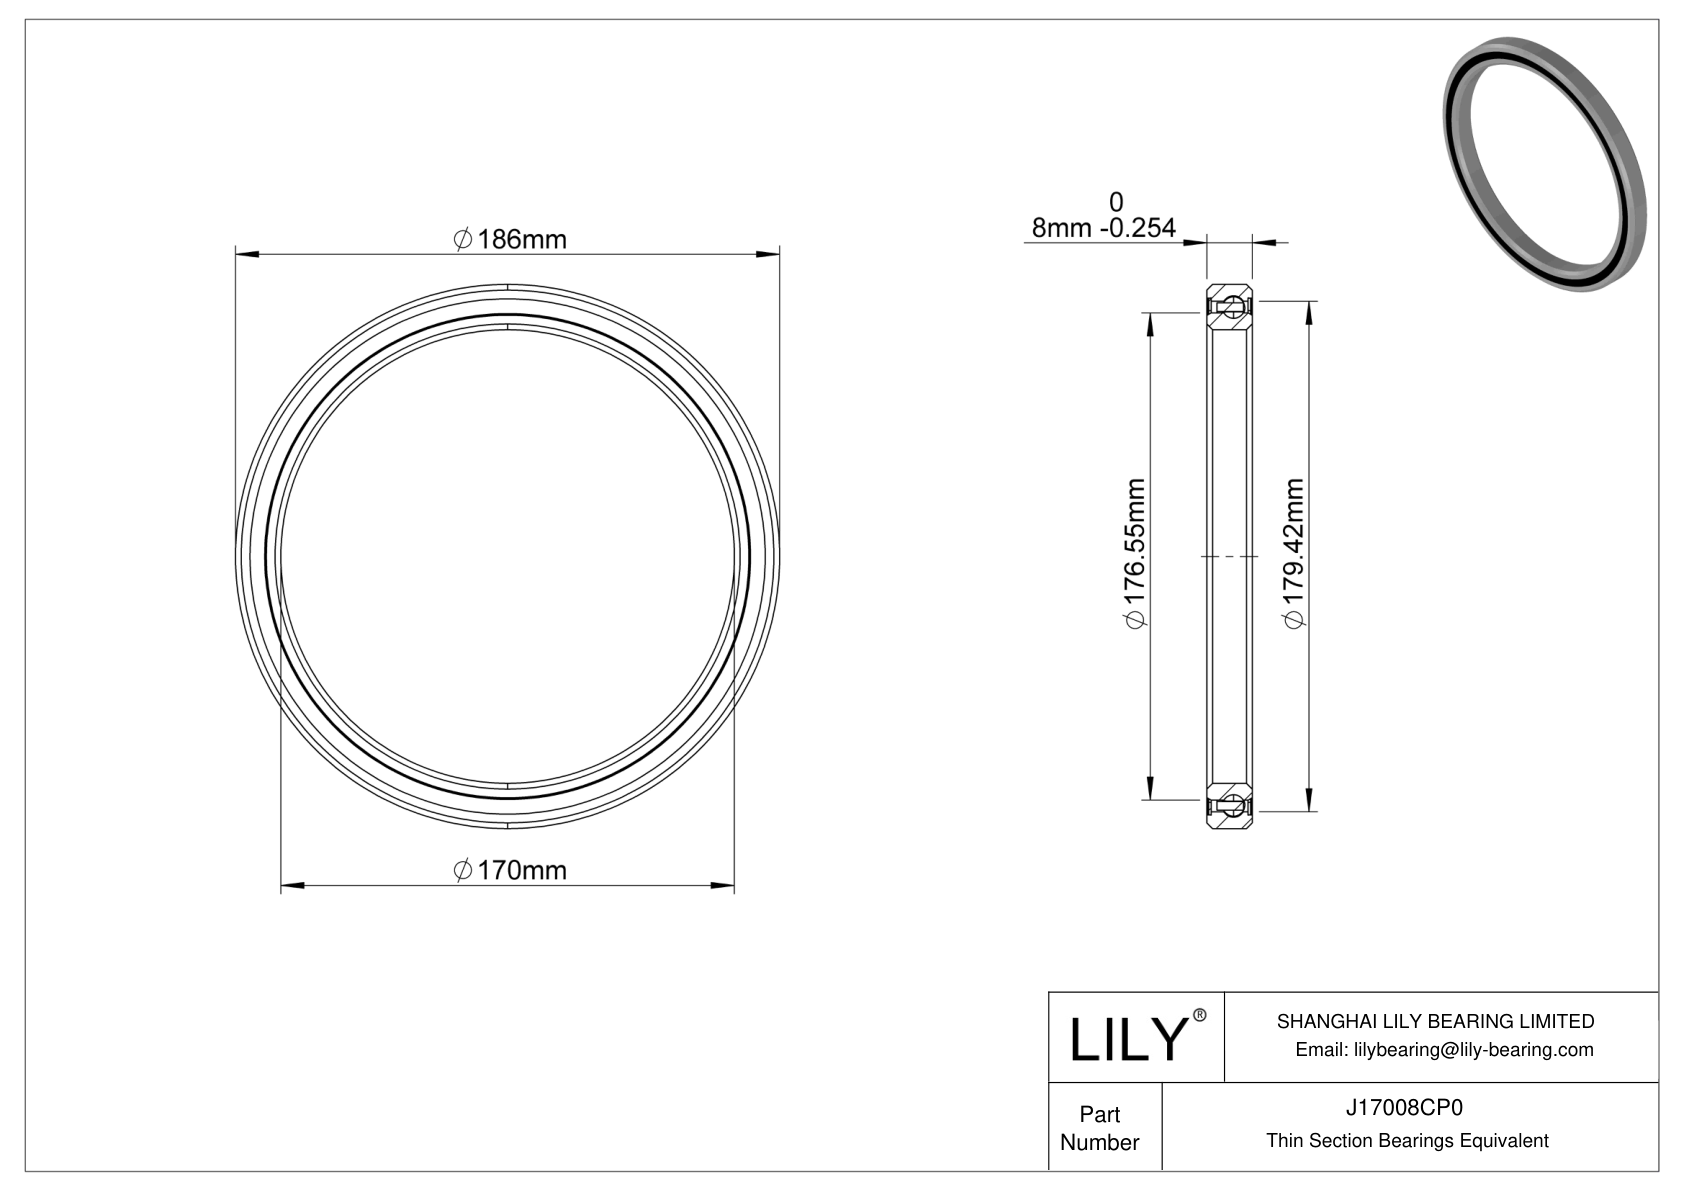 J17008CP0 Constant Section (CS) Bearings cad drawing